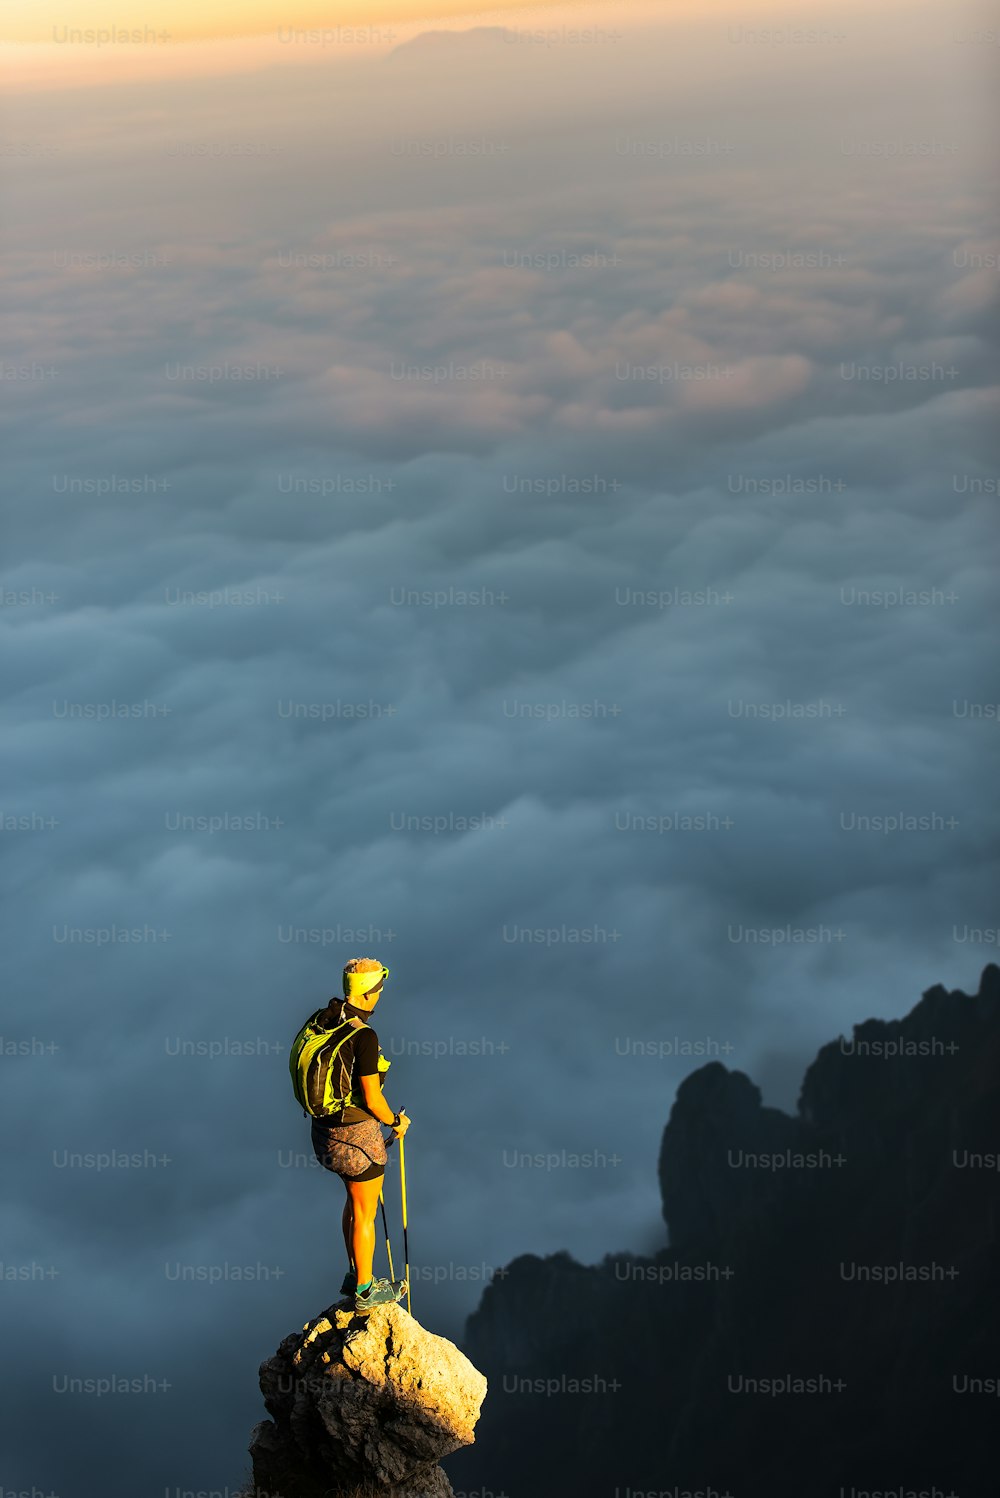 On top of a mountain spire with clouds sea. A person rests while ago a trek and observe the spectacle from the top